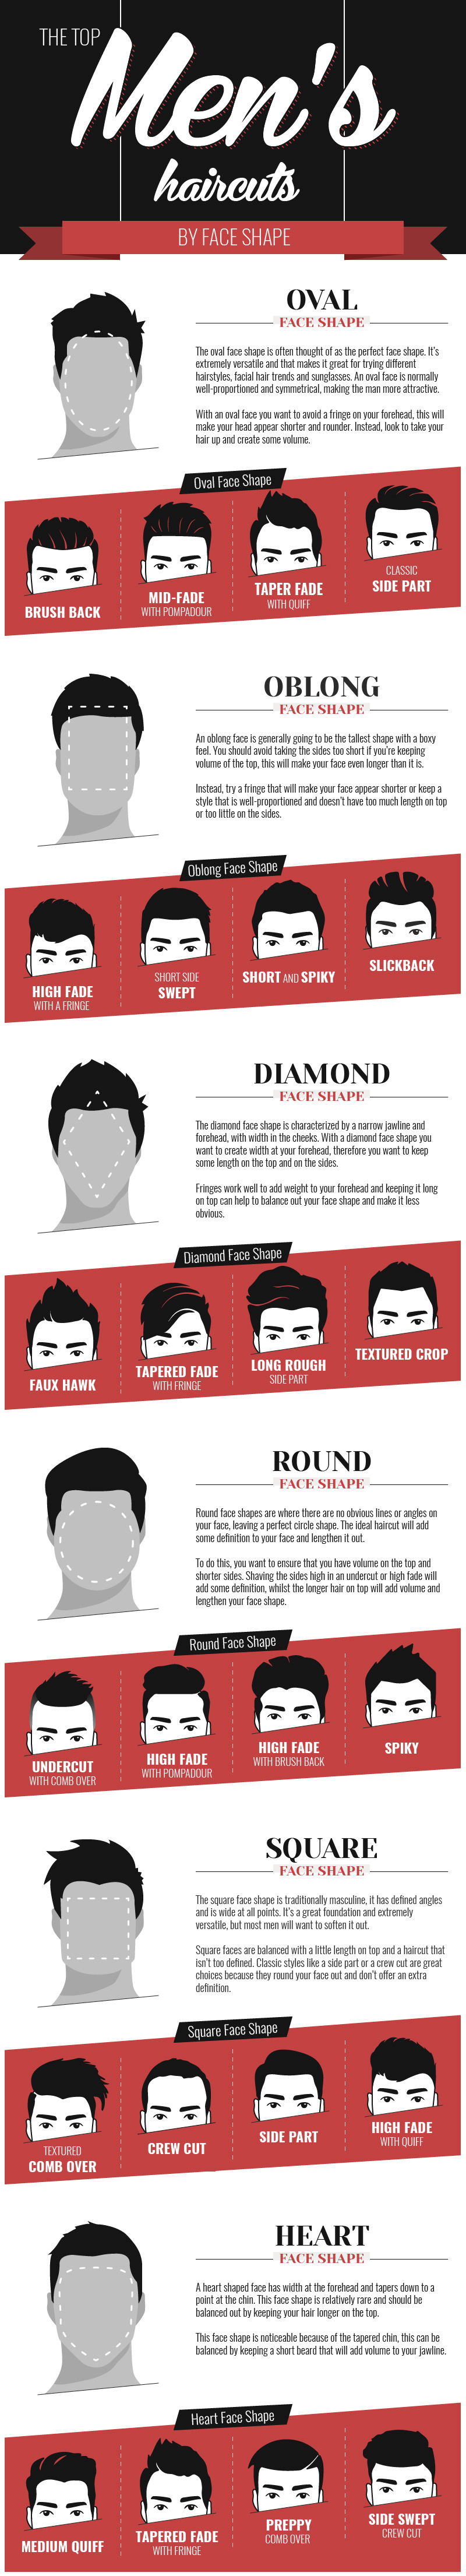 Hairstyles for mix diamond and oblong face